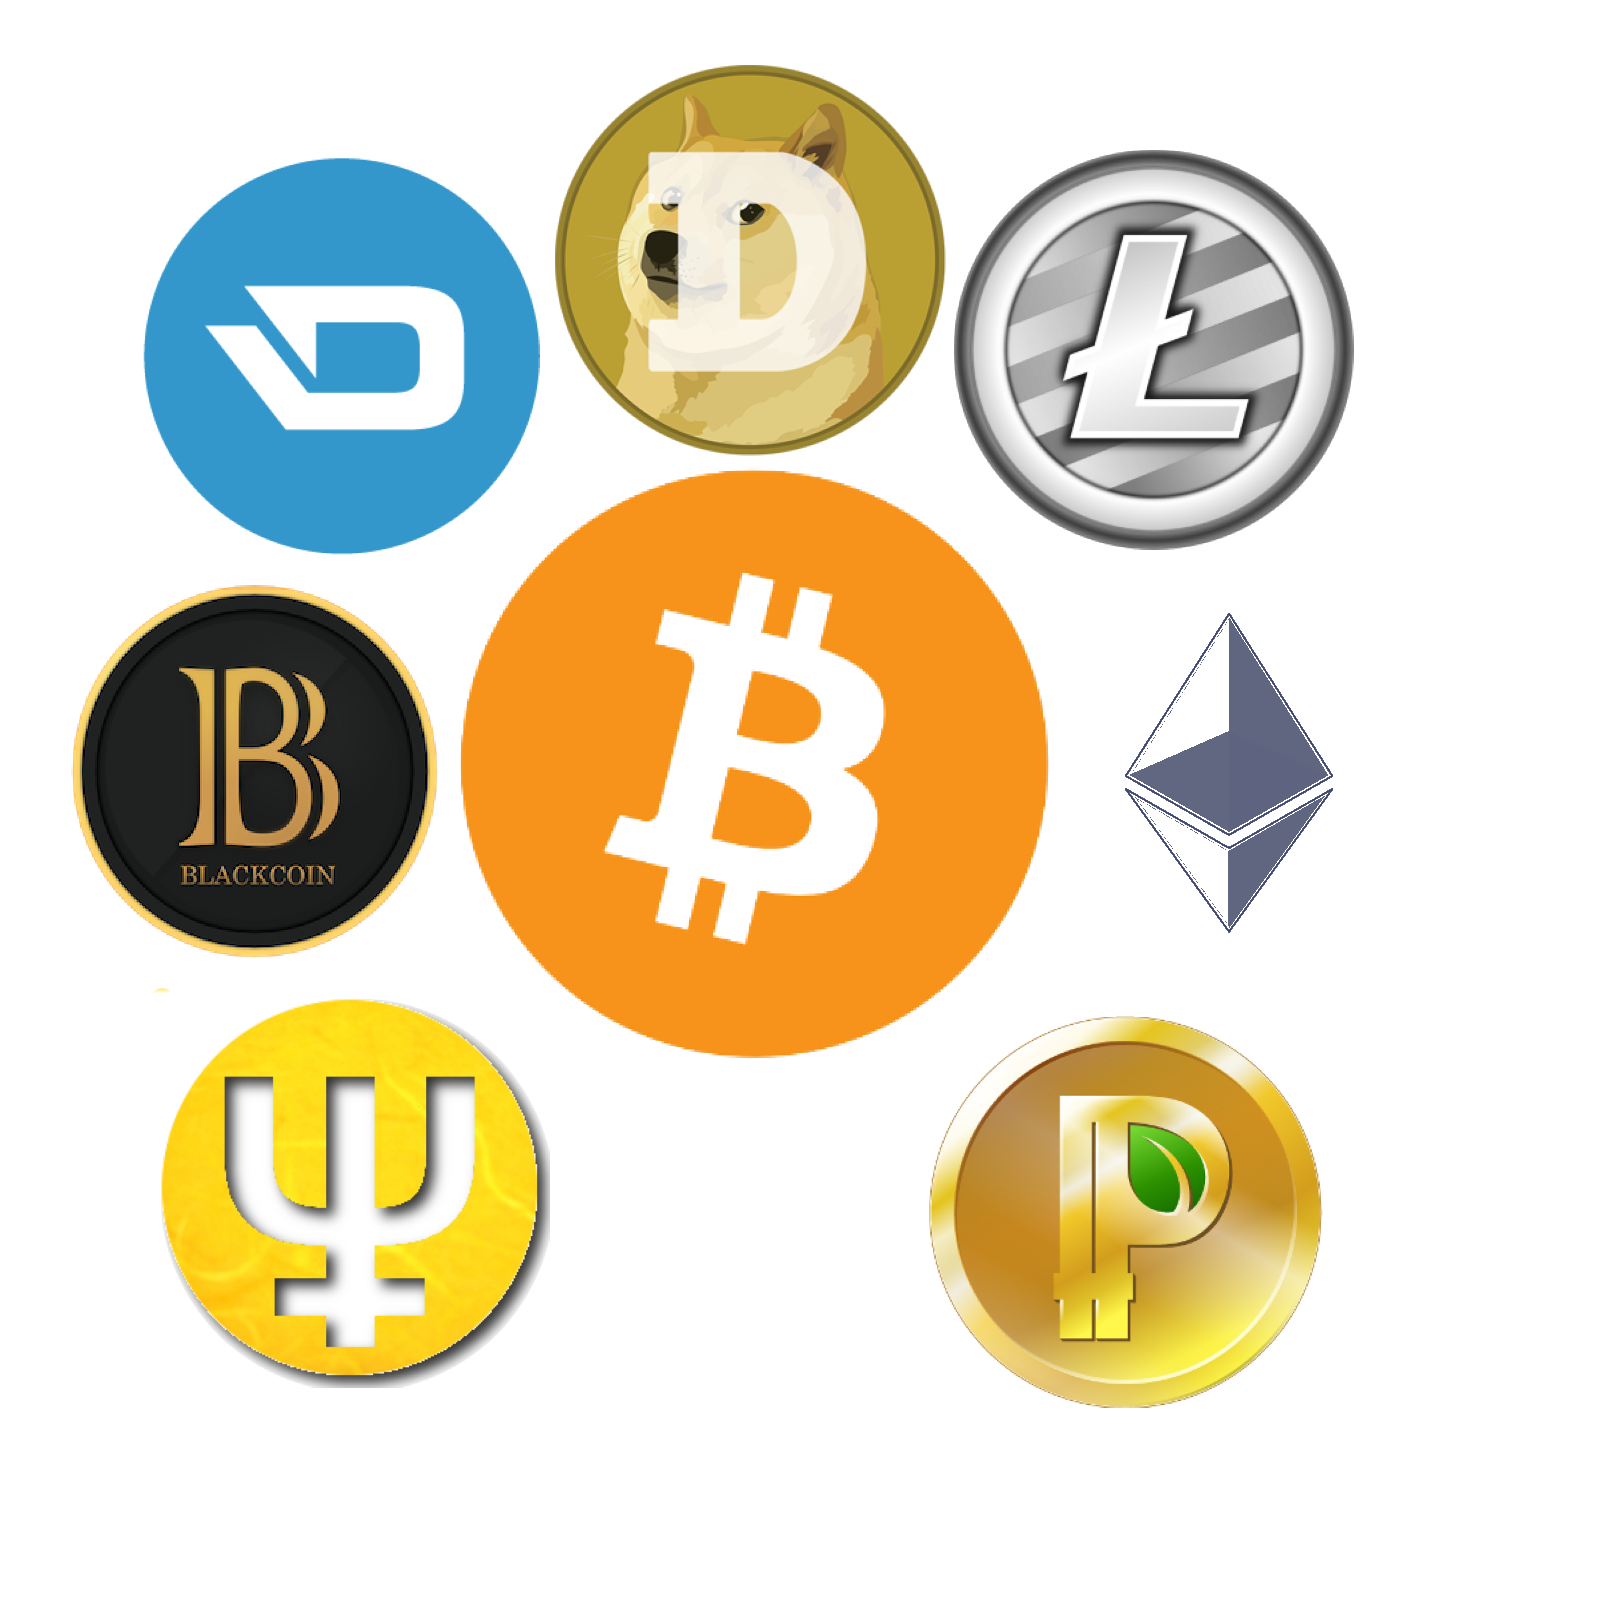 Download Cryptocurrency Faucet Bitcoin Free Frame HQ PNG Image | FreePNGImg